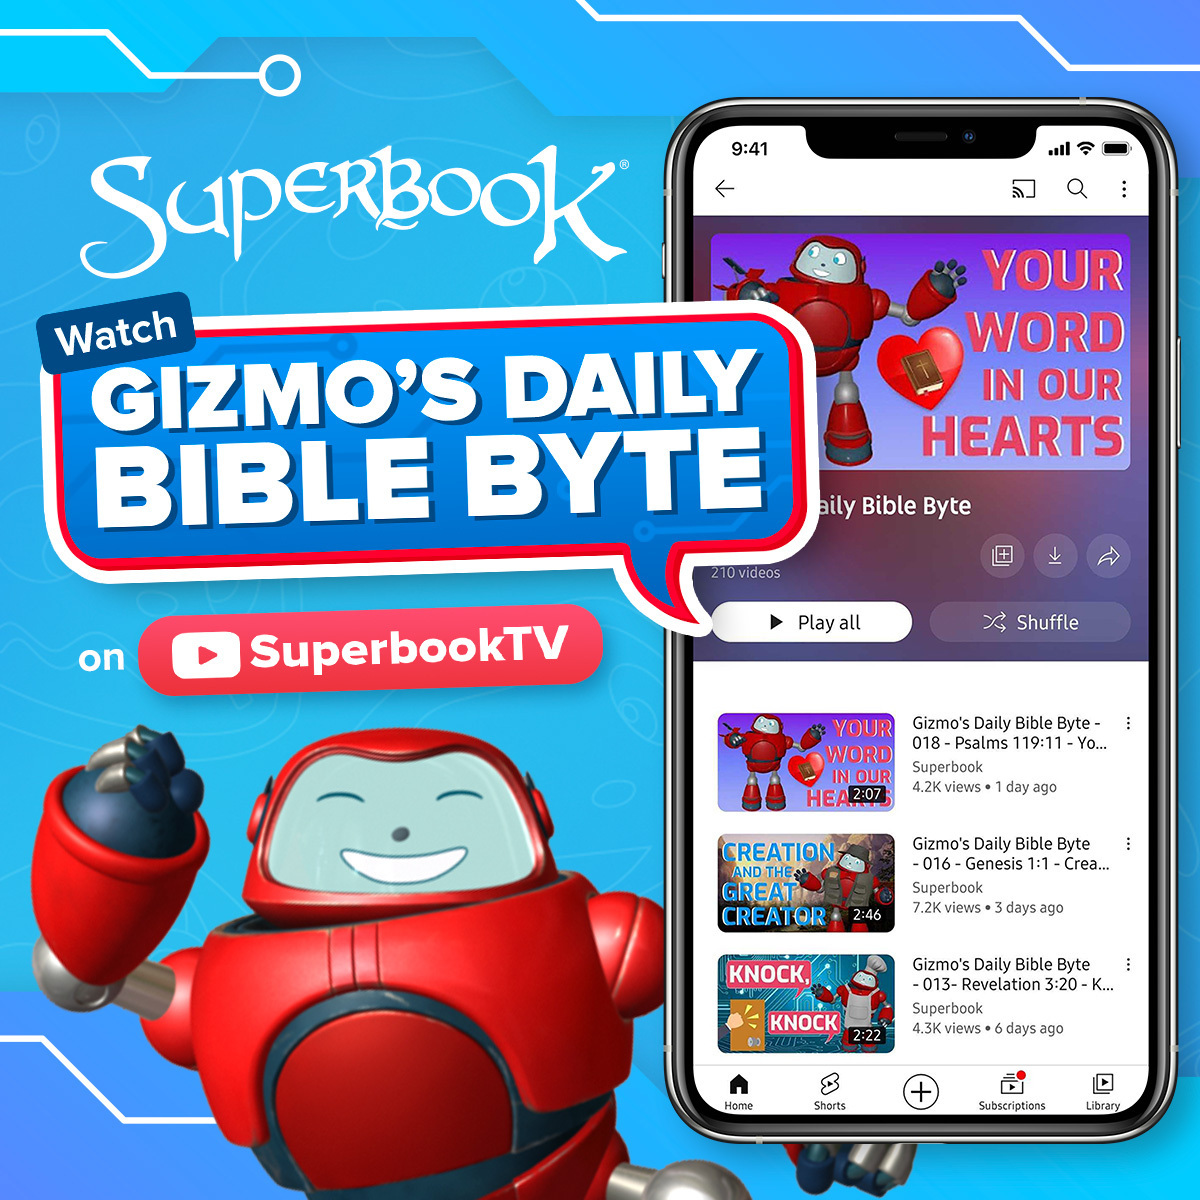 '9:41 ← ç SupERBOOK Watch GIZMO'S DAILY BIBLE BYTE YOUR WORD IN OUR HEARTS aily Bible Byte on Play all SuperbookTV Shuffle YOUR Gizmo's Daily Bible Byte Psalms 119:11- views. day ago CREATION GREAT CREATOR Gizmo's Daily Bible Byte Genesis Crea... Superbook 2:46 KNOCK, Gizmo's Bible Byte å KNOCK Superbook Home Shorts Library'